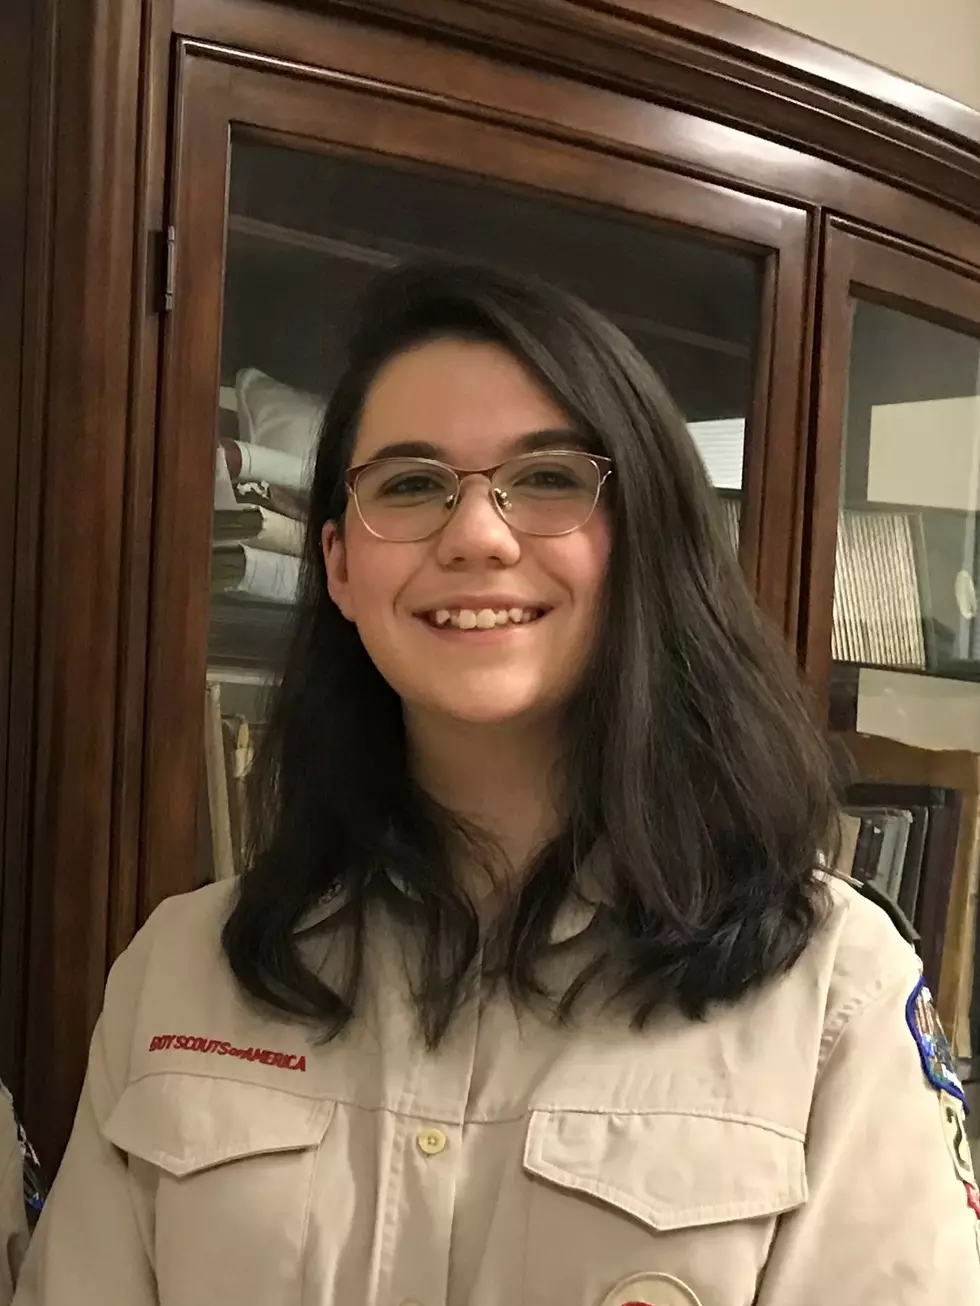 Iowa Has its First Two Female Eagle Scouts